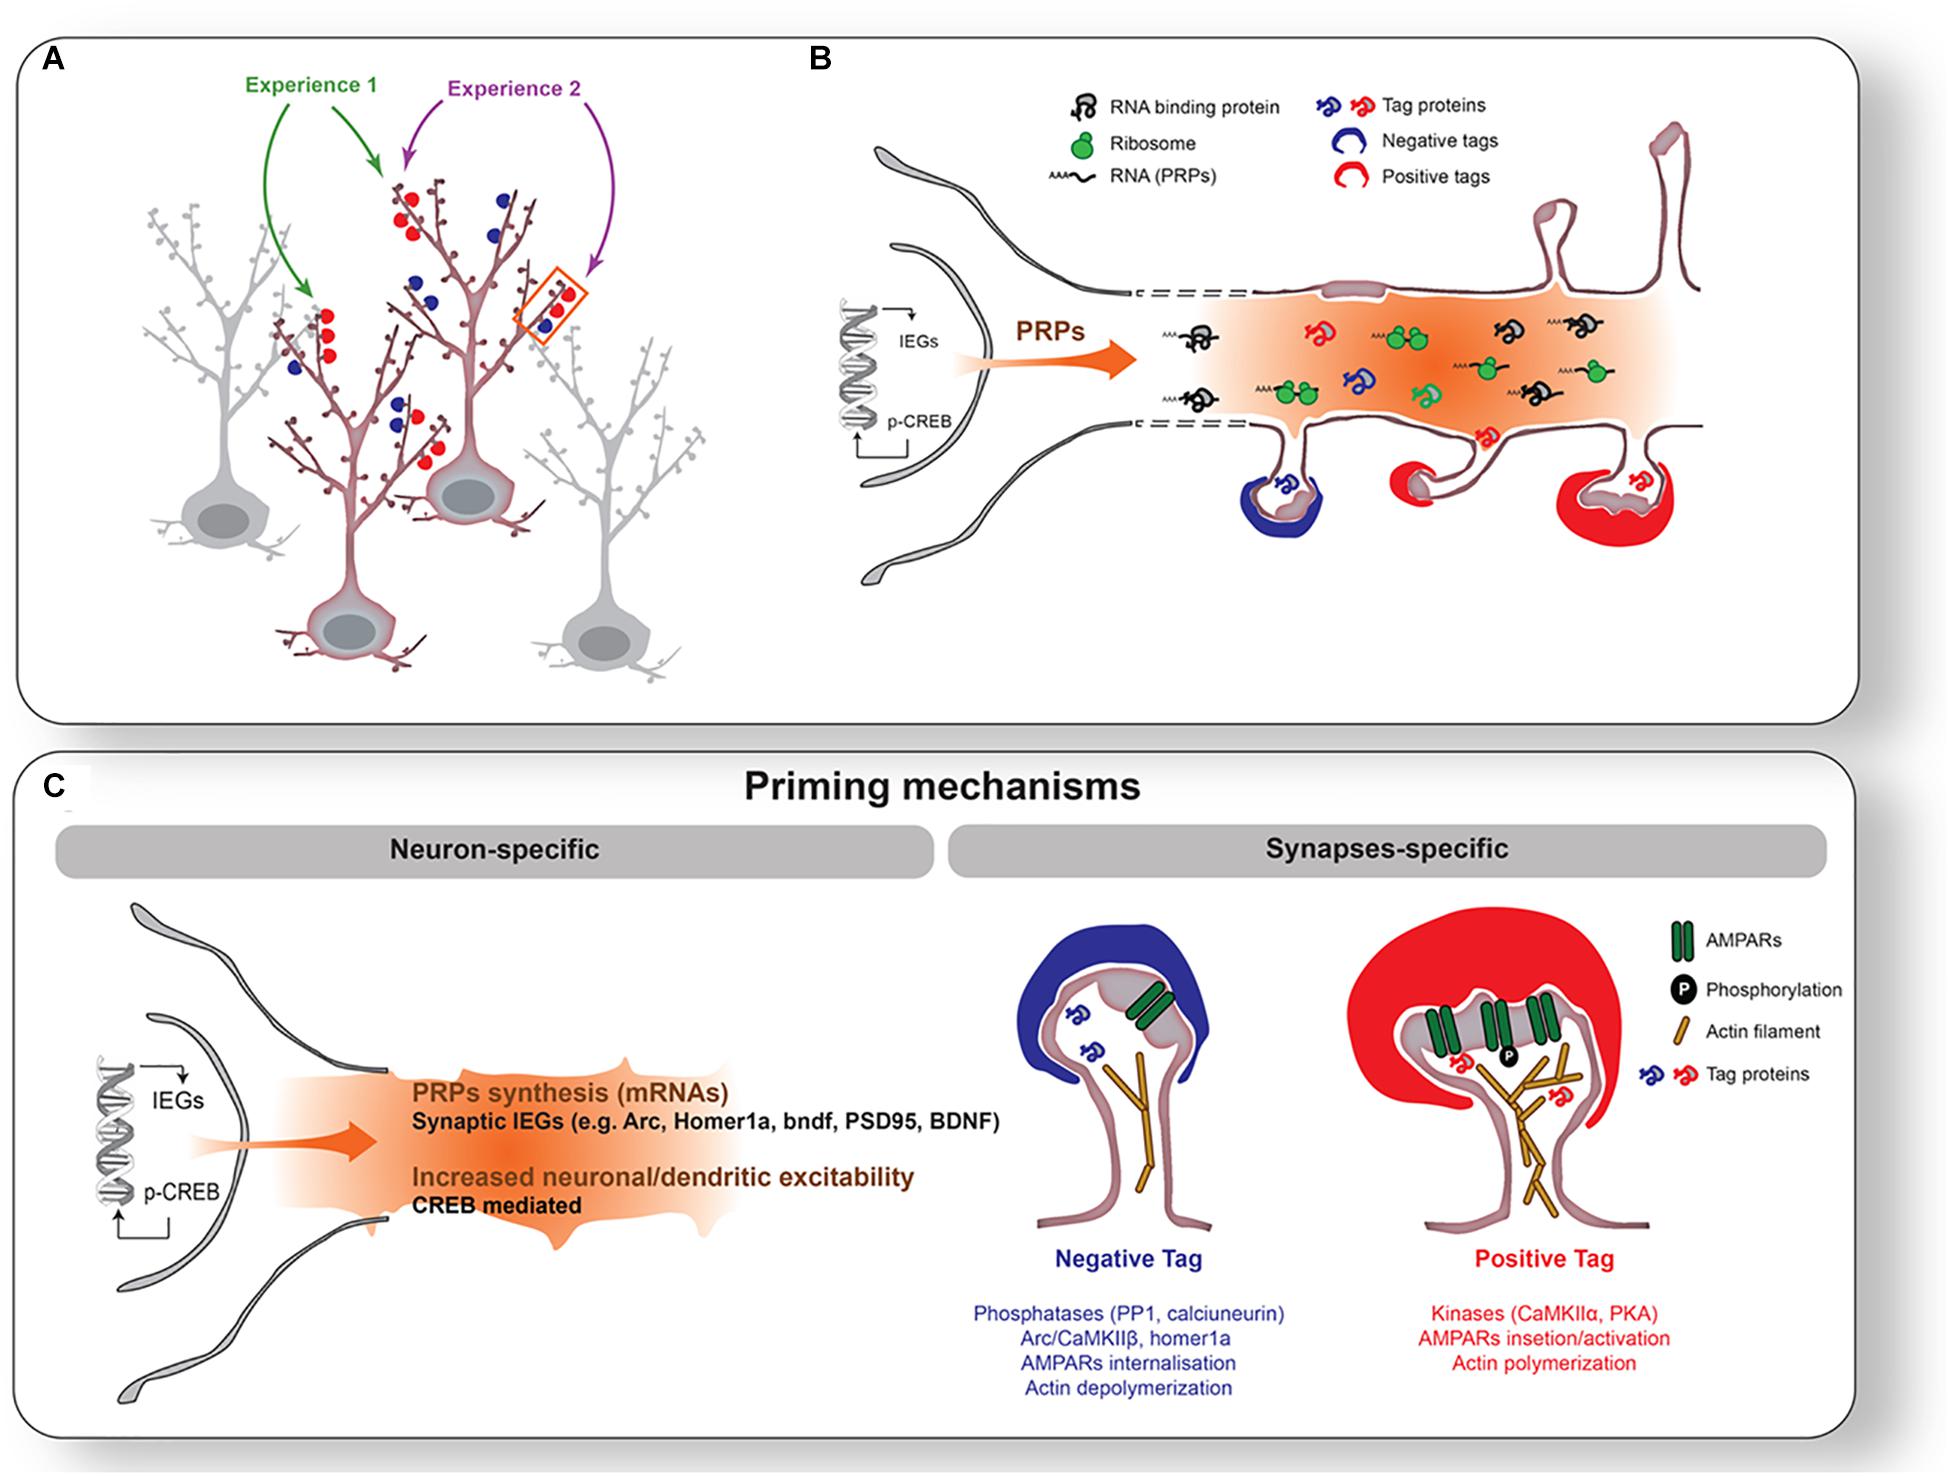 Frontiers  Cellular and Molecular Mechanisms of REM Sleep Homeostatic  Drive: A Plausible Component for Behavioral Plasticity